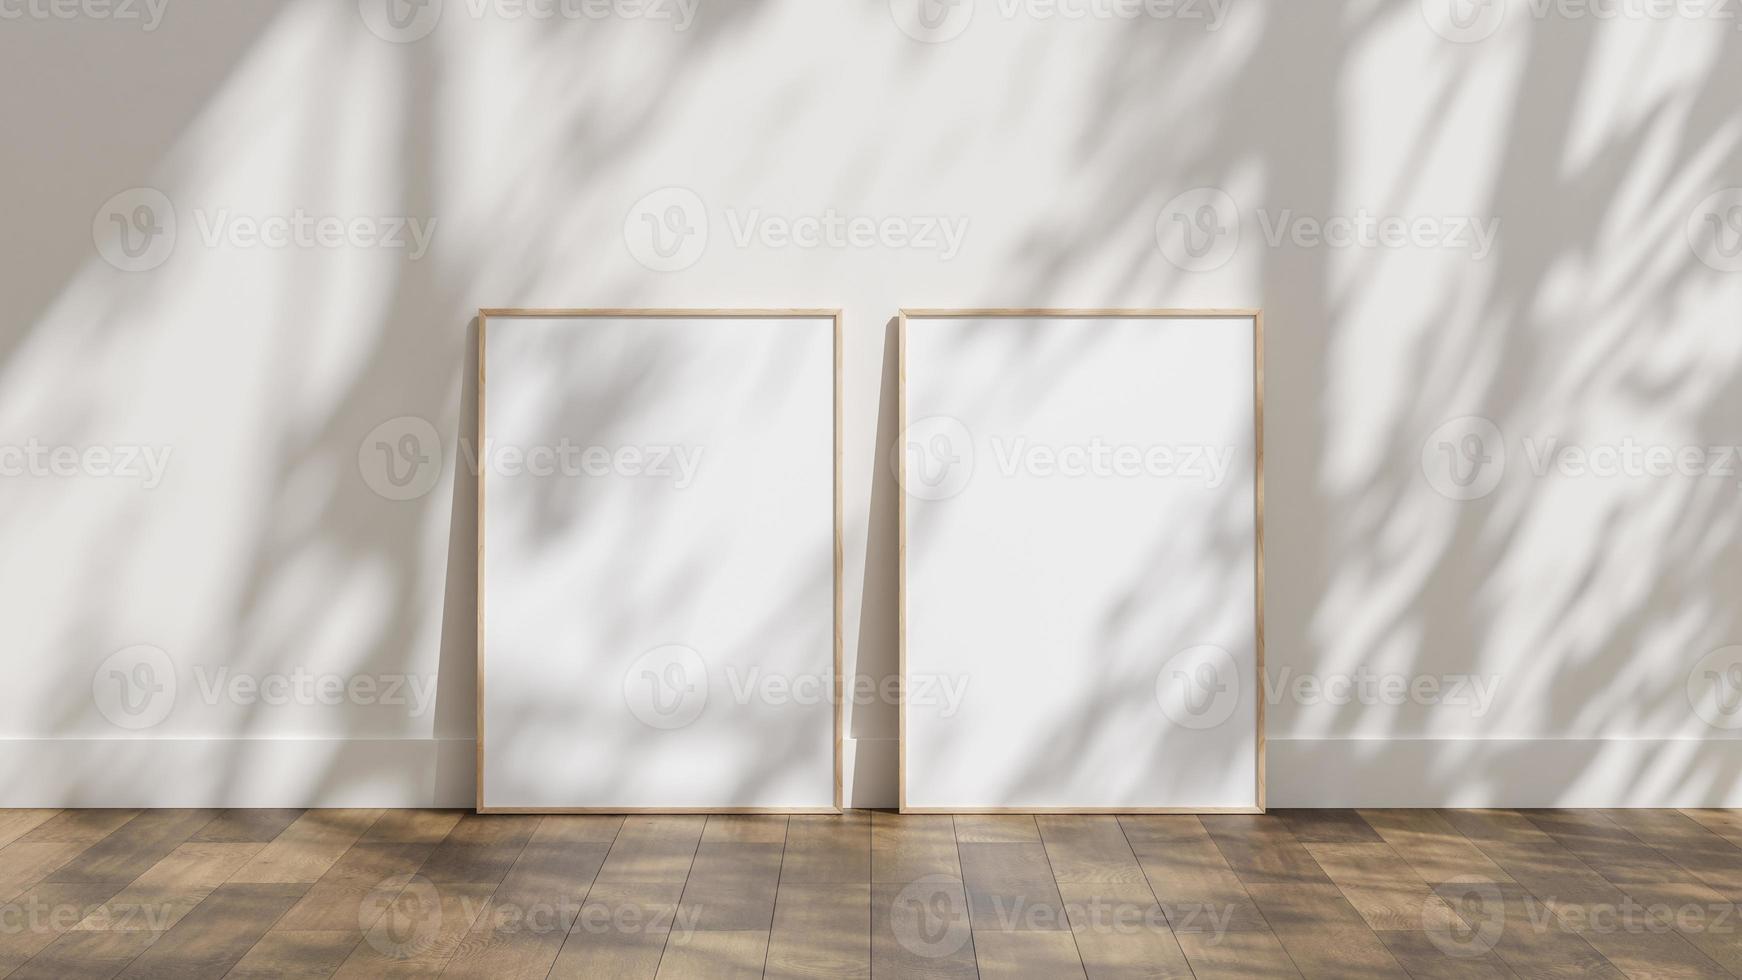 Frame poster mockup on wooden floor with white wall and sunlight shadow overlay photo